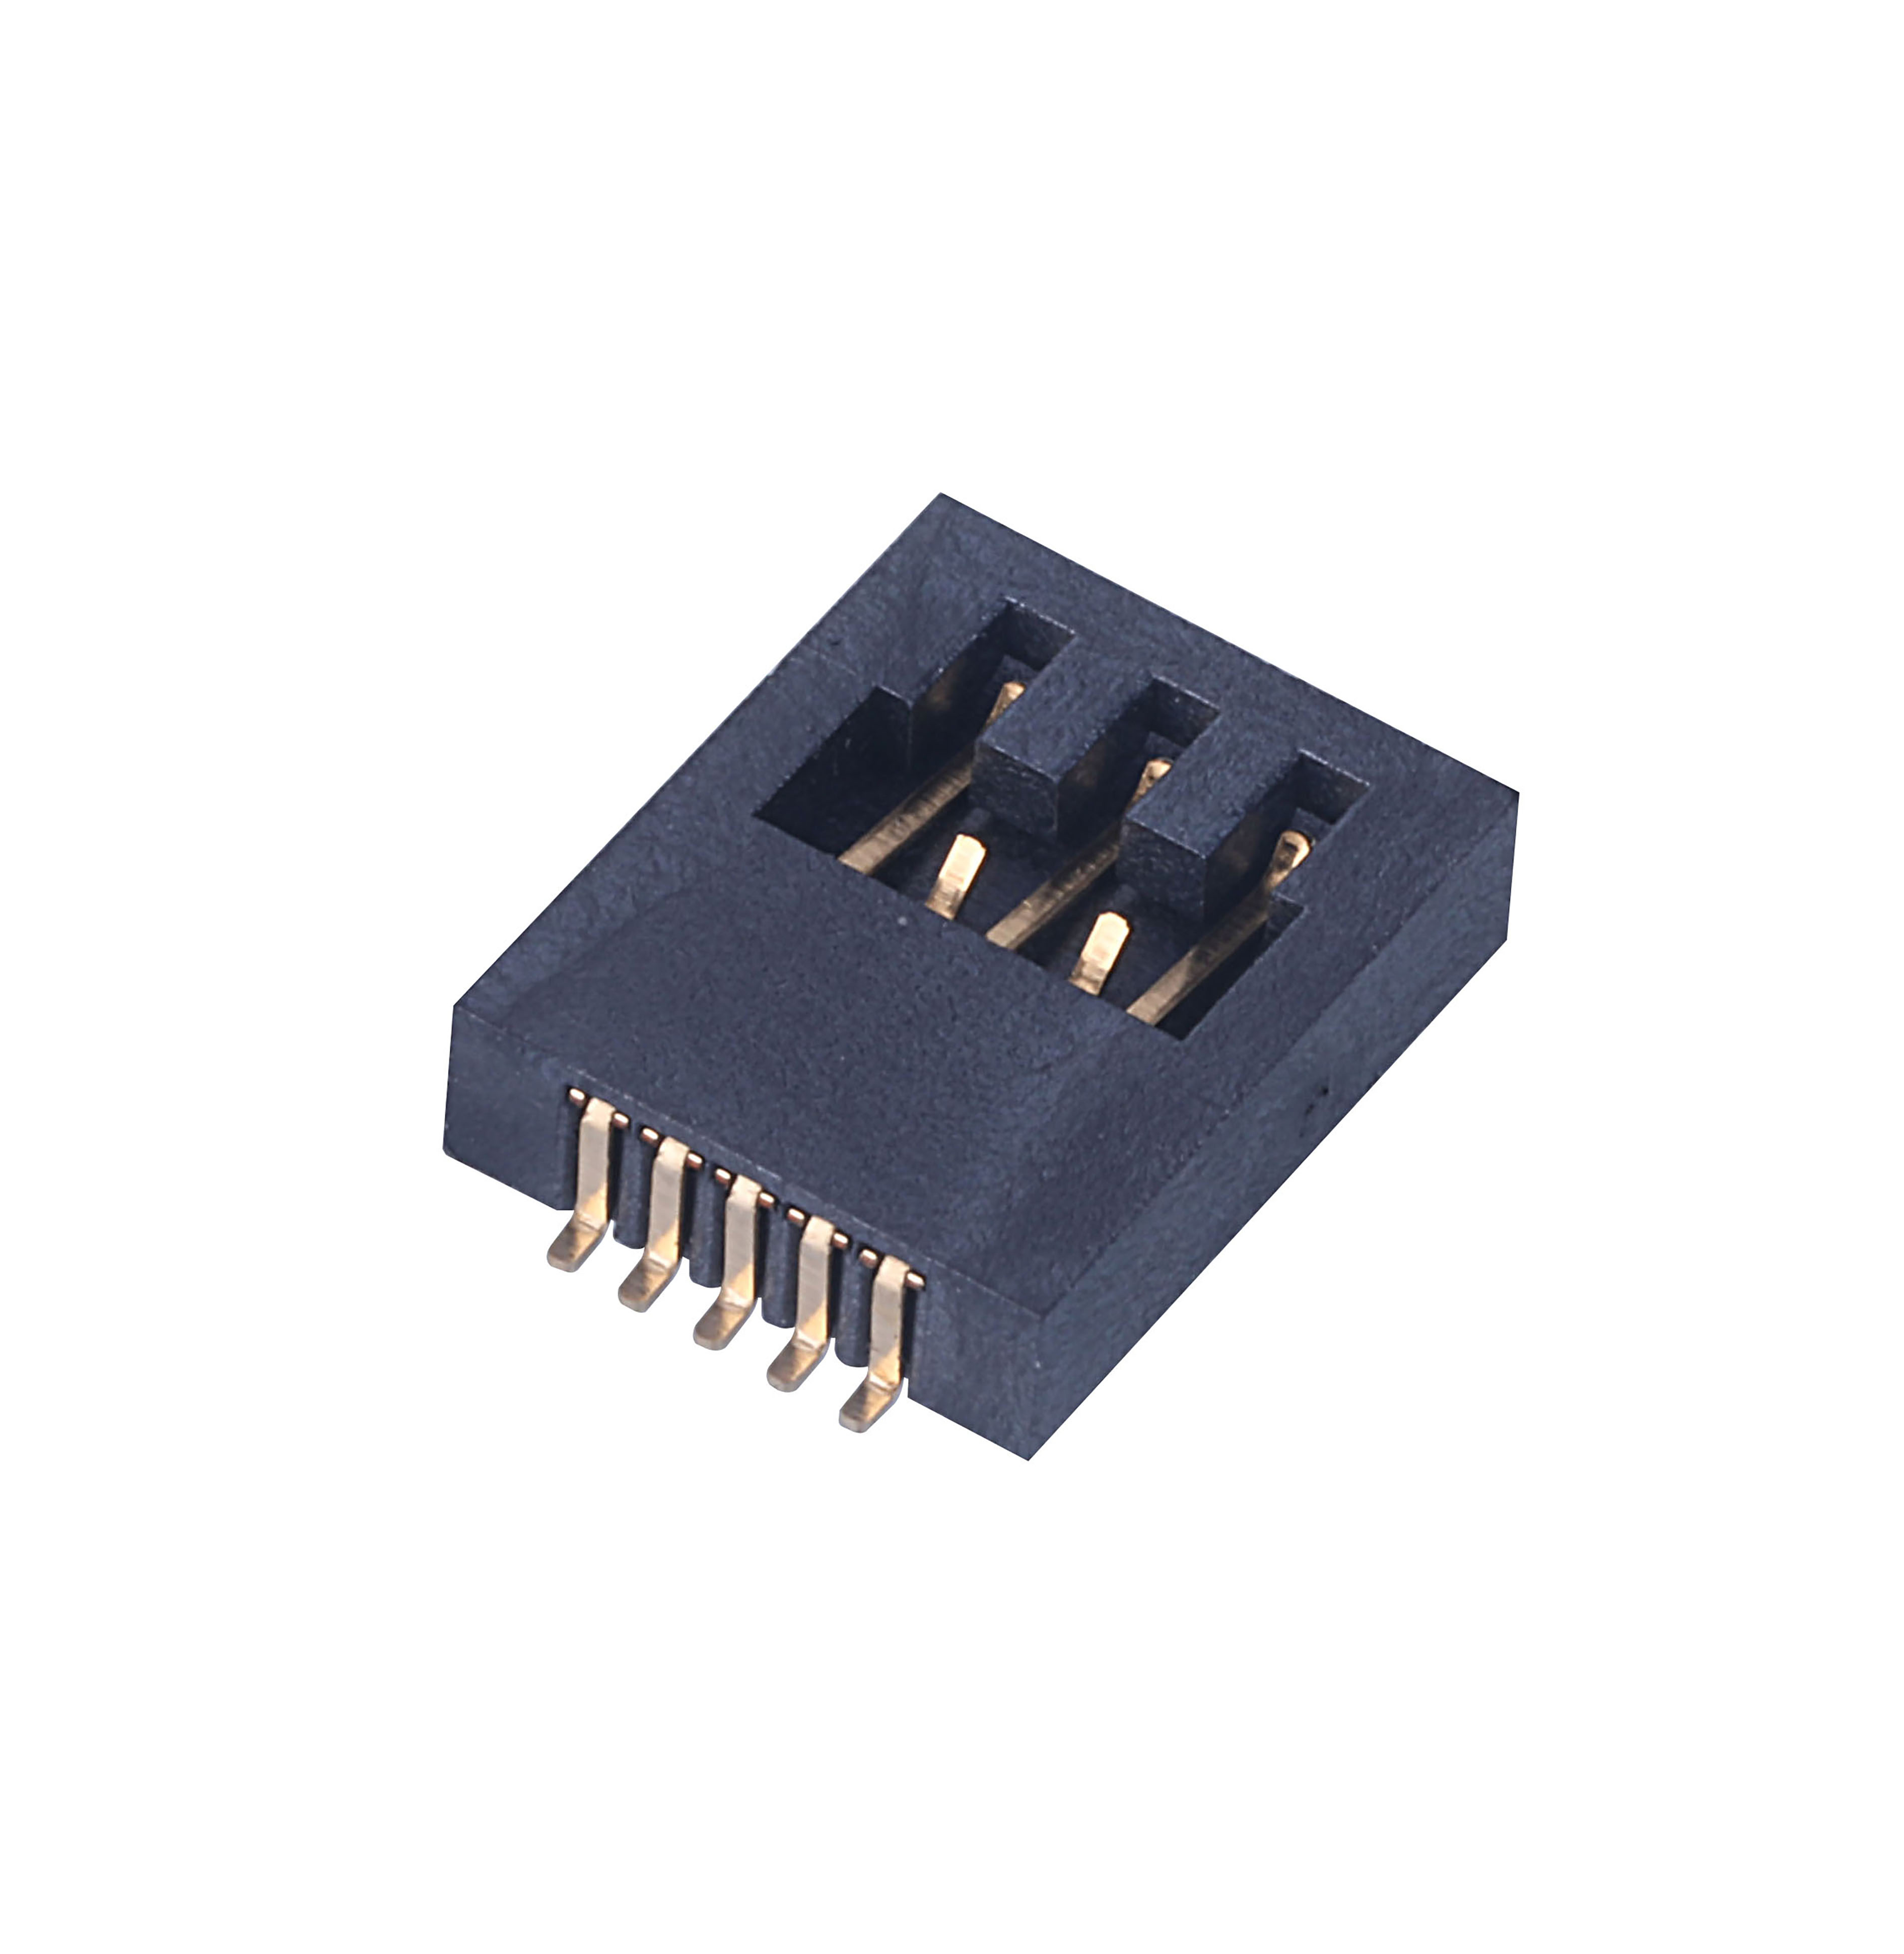 GP04C-06200STRIP SOCKET CONNECTOR 5P H=2.5 with post for Blood Gluecose meter Imej Pilihan